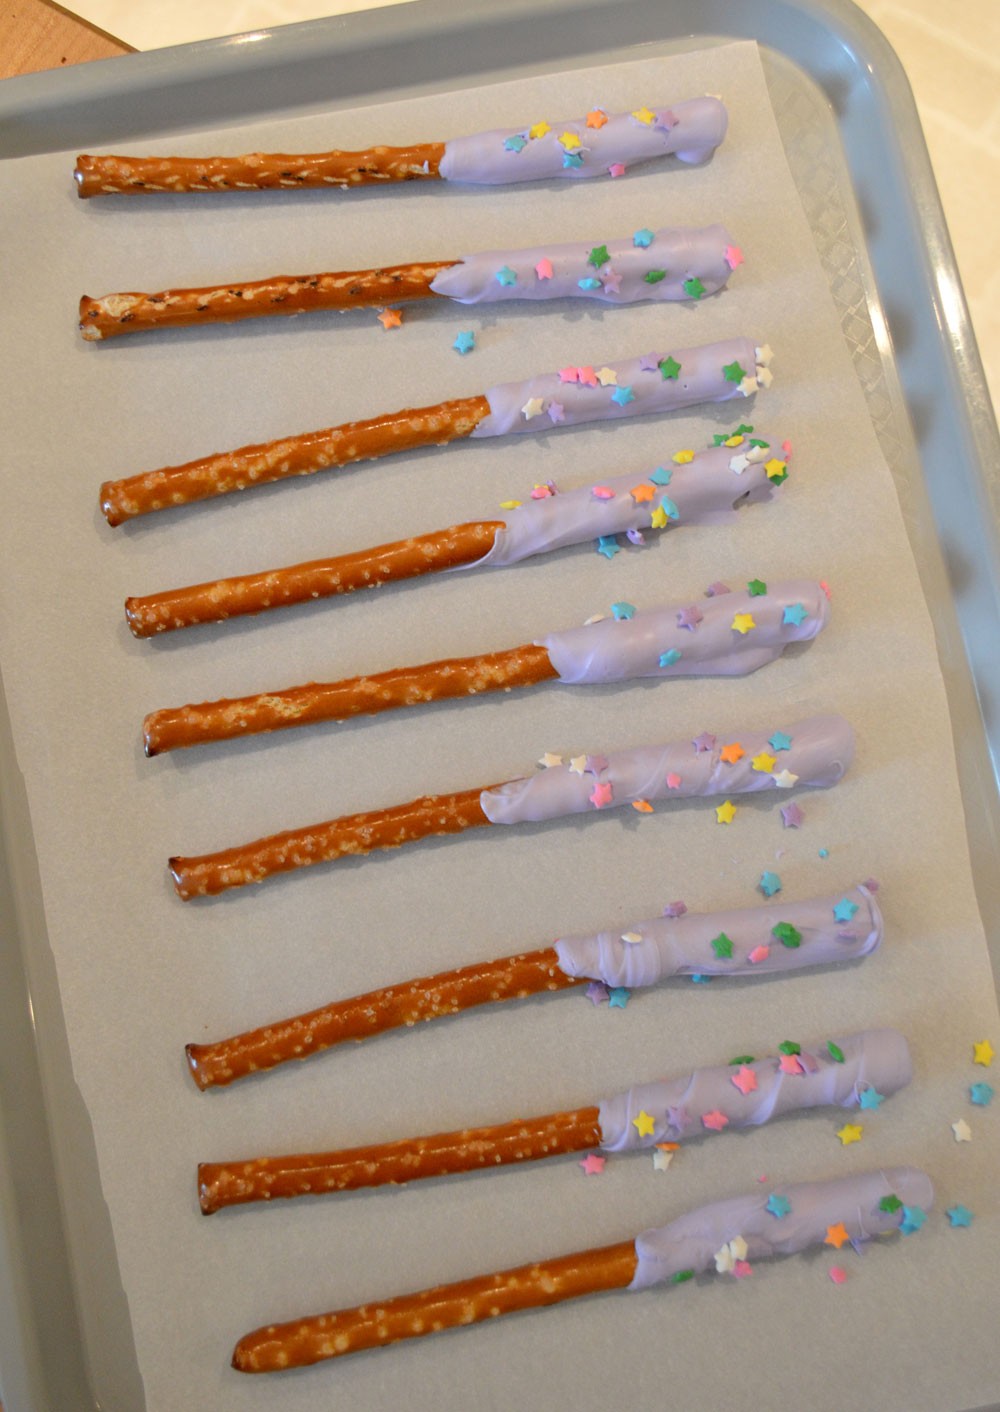 Yummy Chocolate dipped pretzels party treats - Mommy Scene